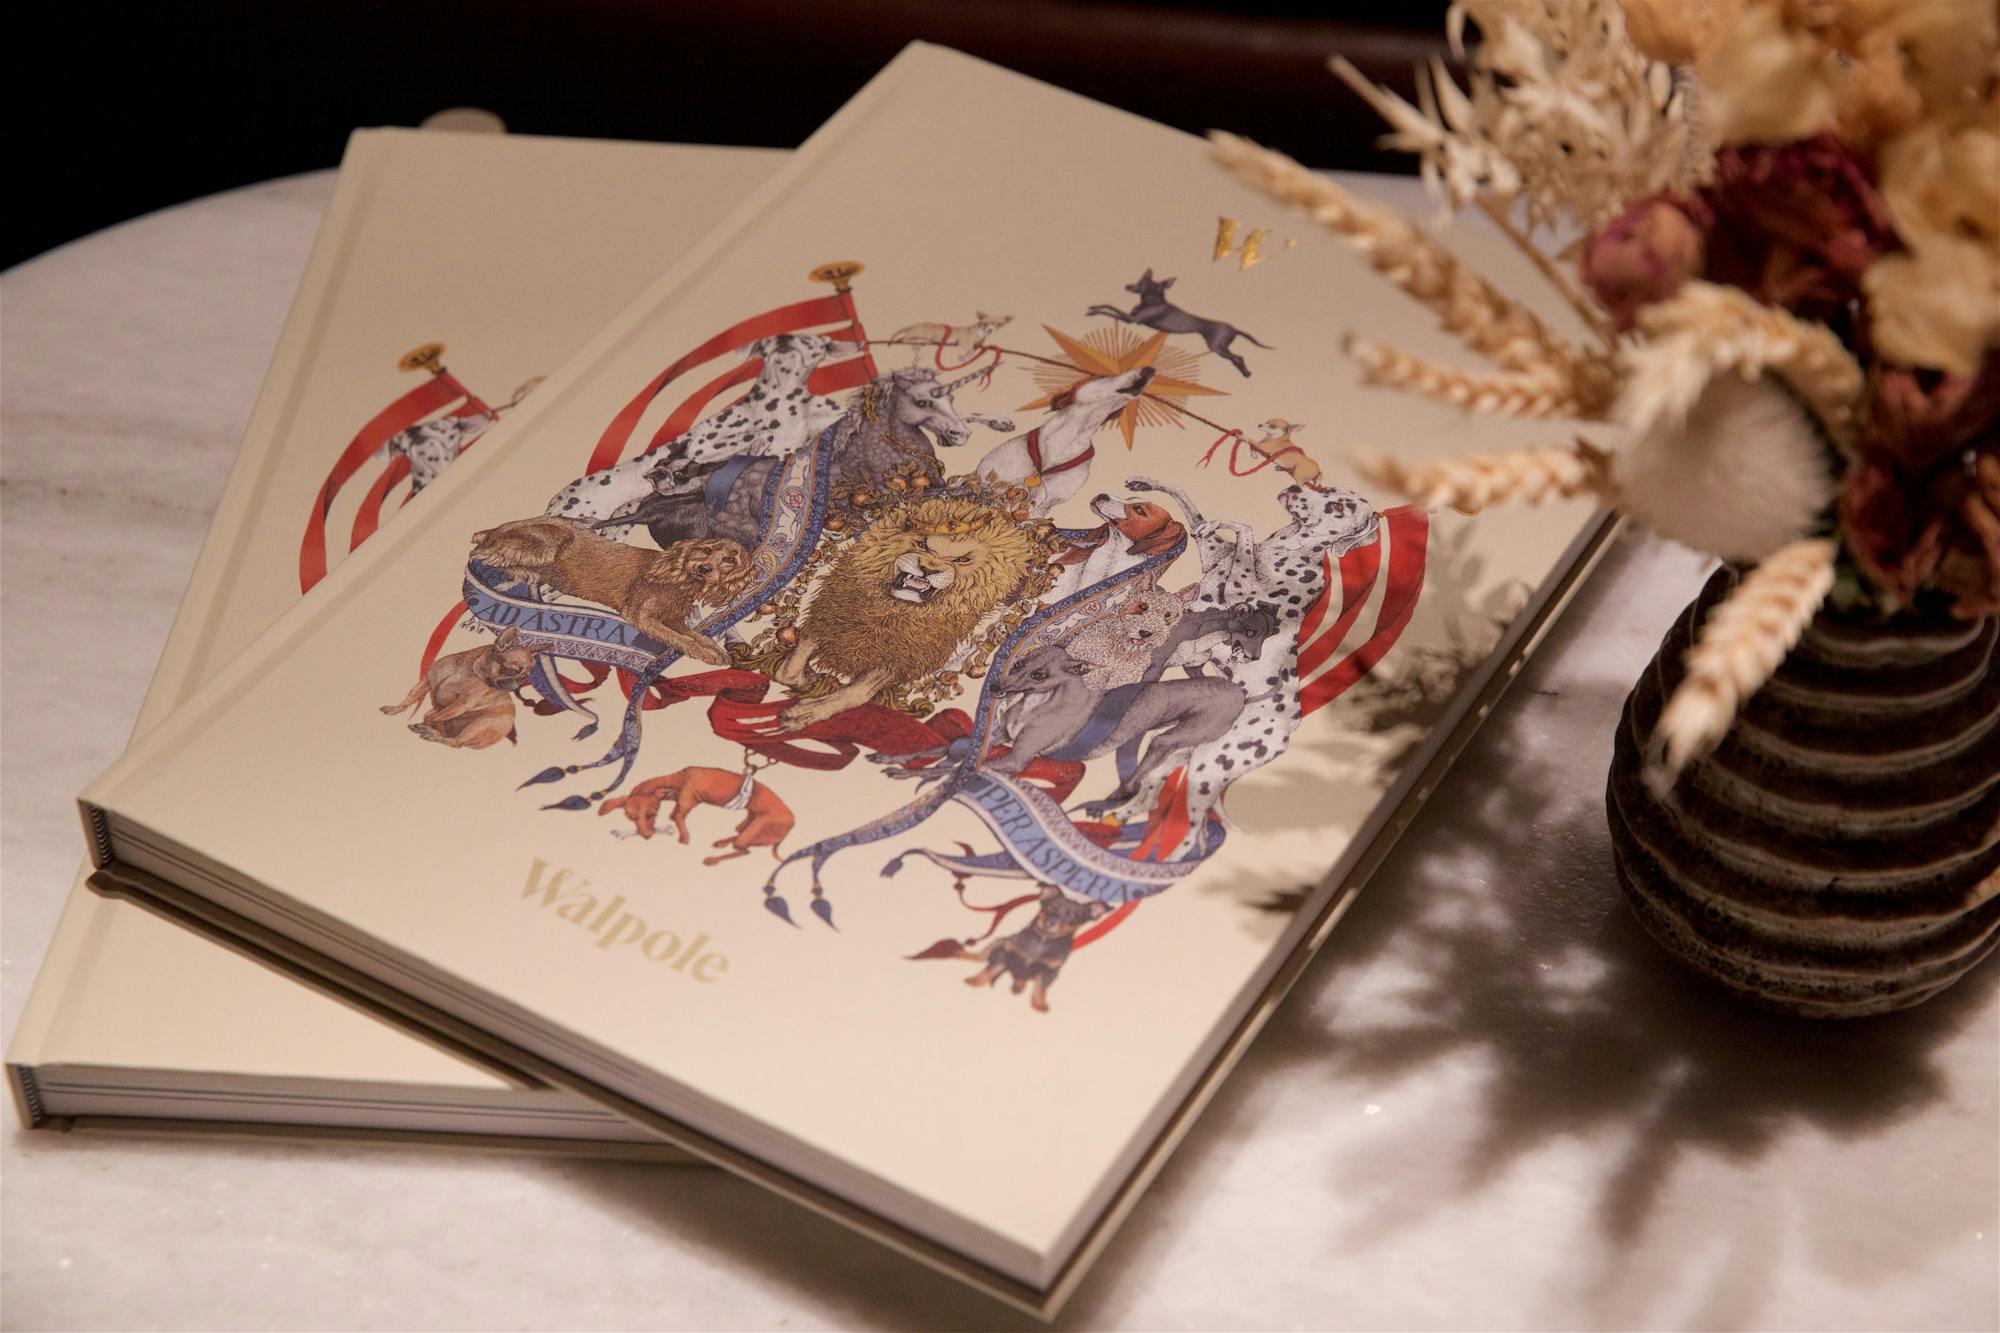 Book of British Luxury 'Through Adversity to the Stars': Introducing the new Walpole Yearbook 